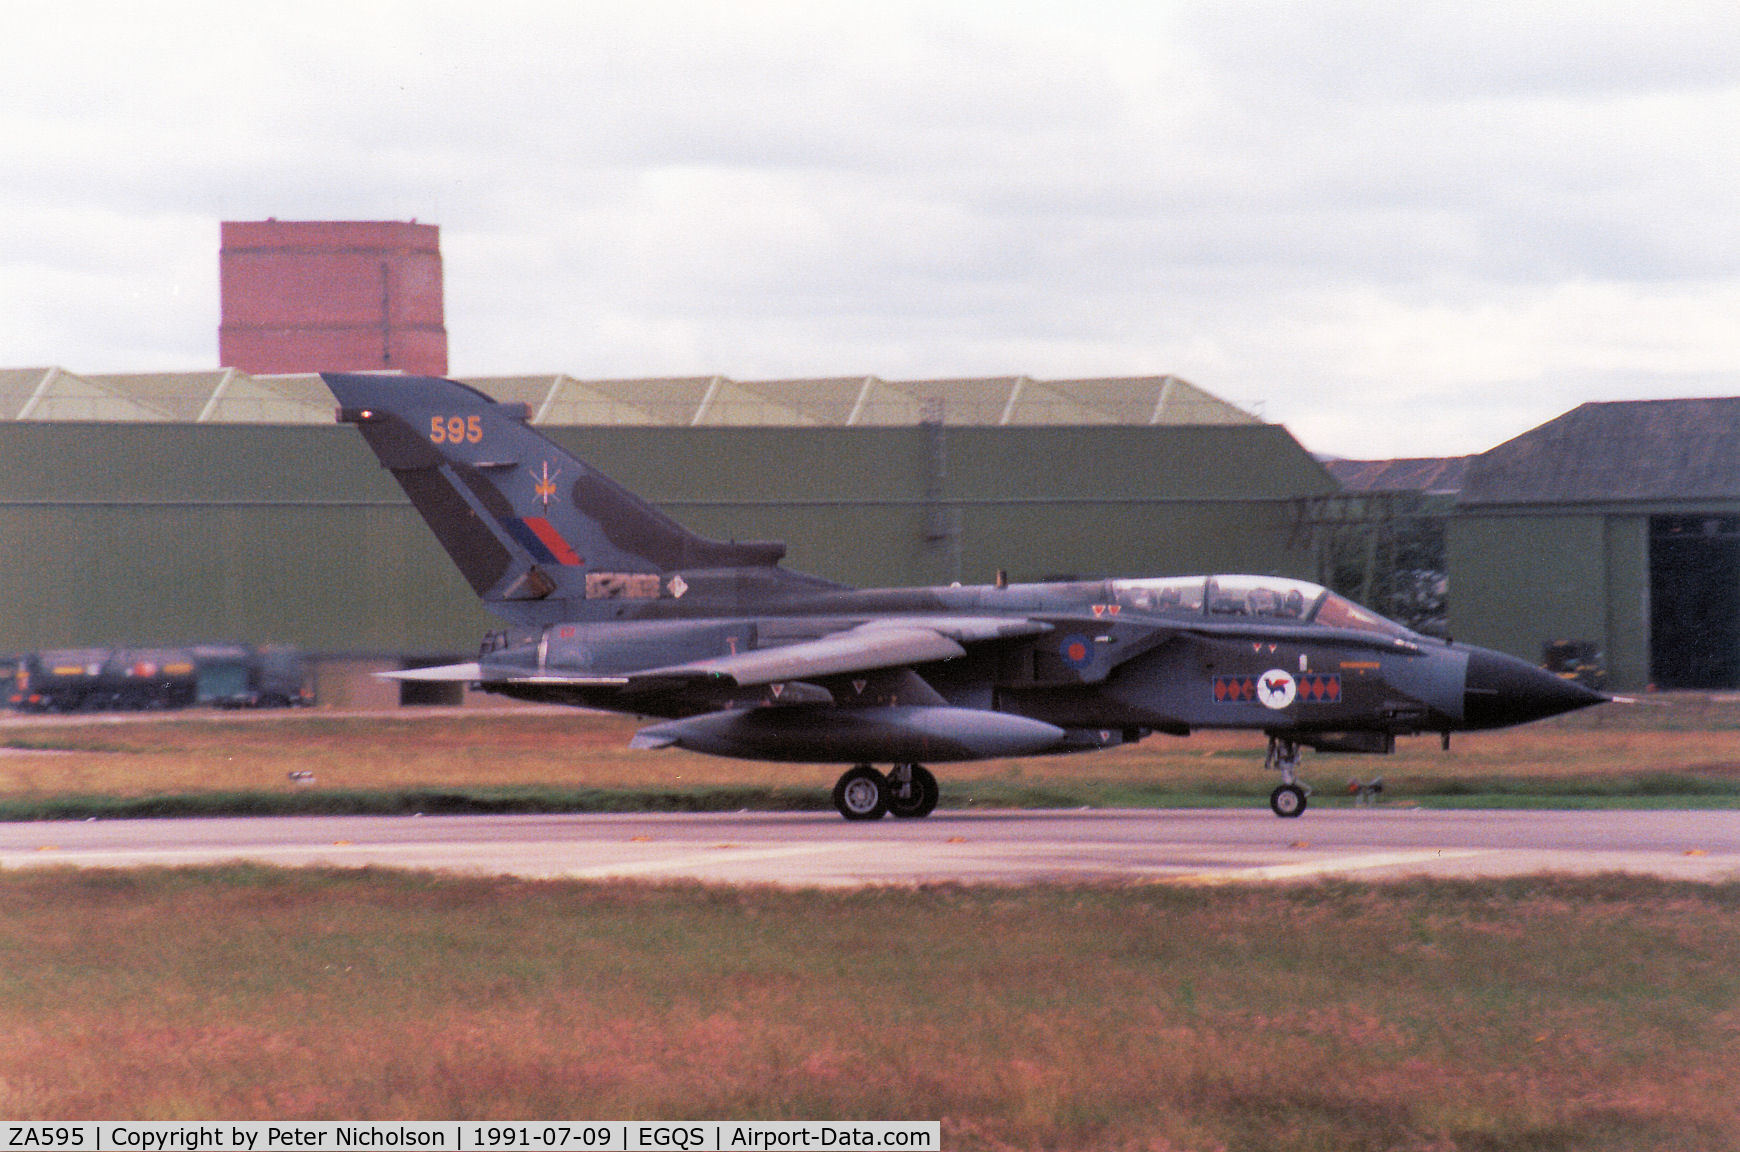 ZA595, 1982 Panavia Tornado GR.1 C/N 112/BT023/3059, Tornado GR.1, callsign Magnum 1, of the Tactical Weapons Conversion Unit at RAF Honington taxying to the active runway at RAF Lossiemouth in the Summer of 1991.